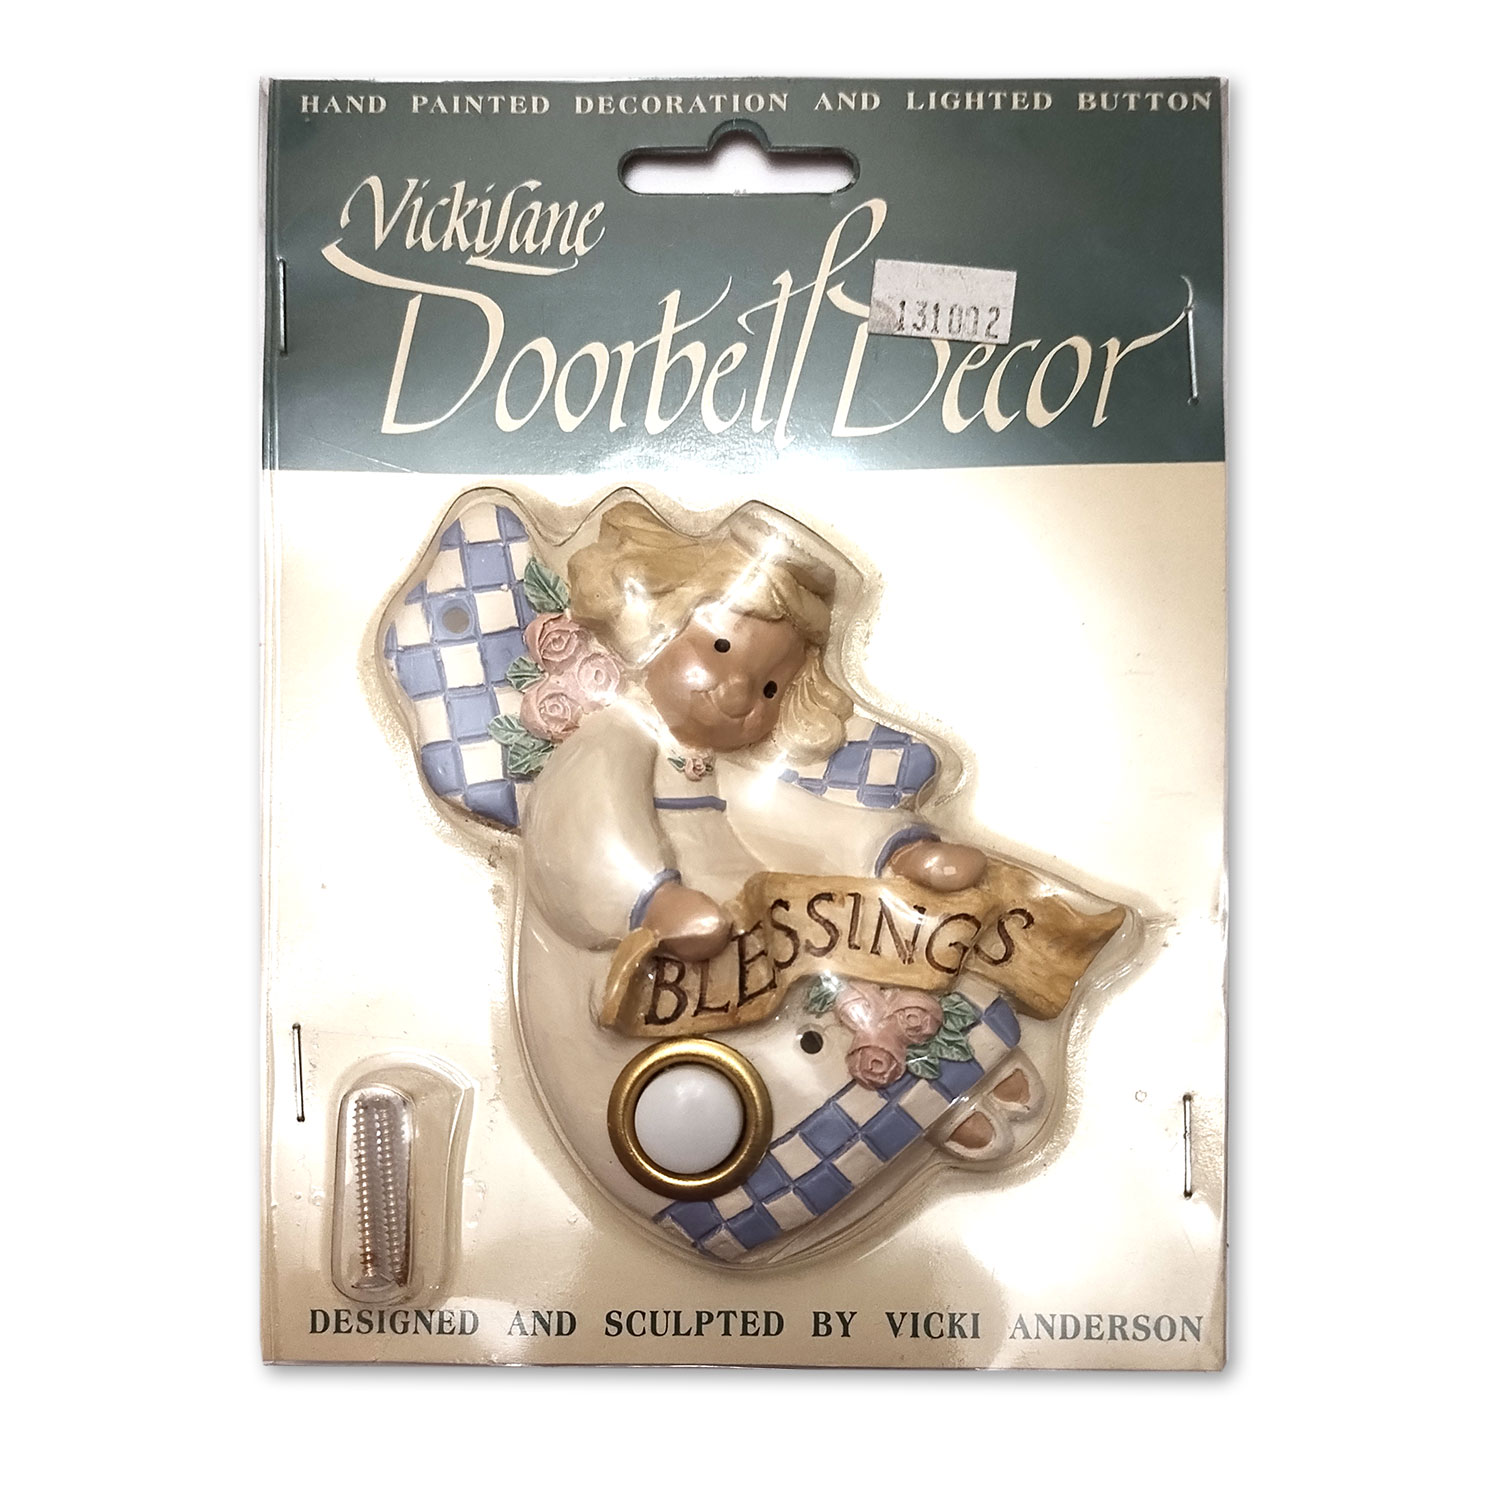 131002 - Vickilane Hand Painted Lighted Button Doorbell - Angel